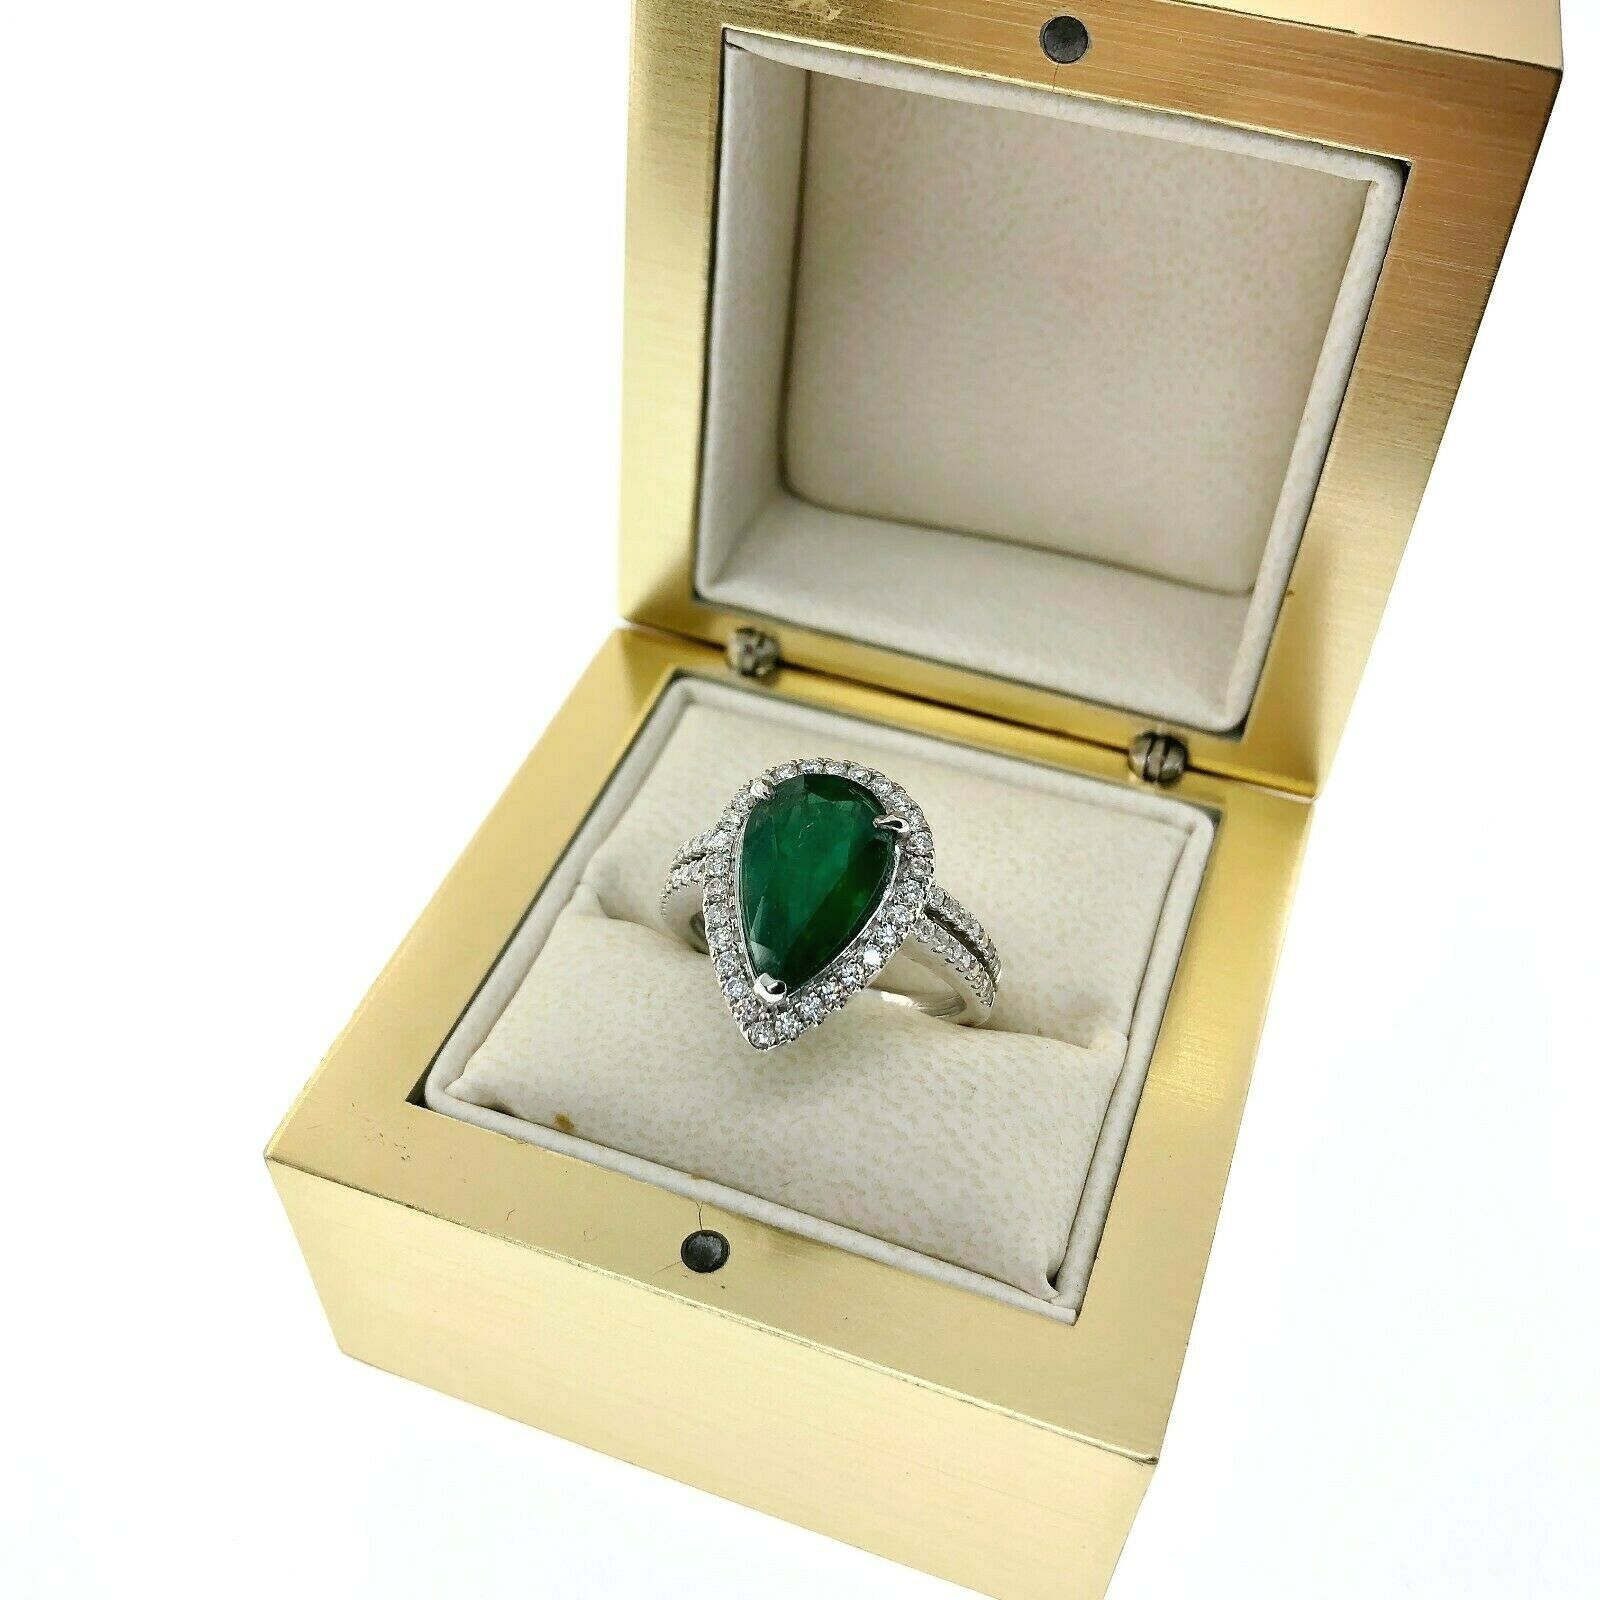 3.82 Carats t.w. Diamond and Emerald Halo Ring 18K Gold Emerald is 3.25 Carats